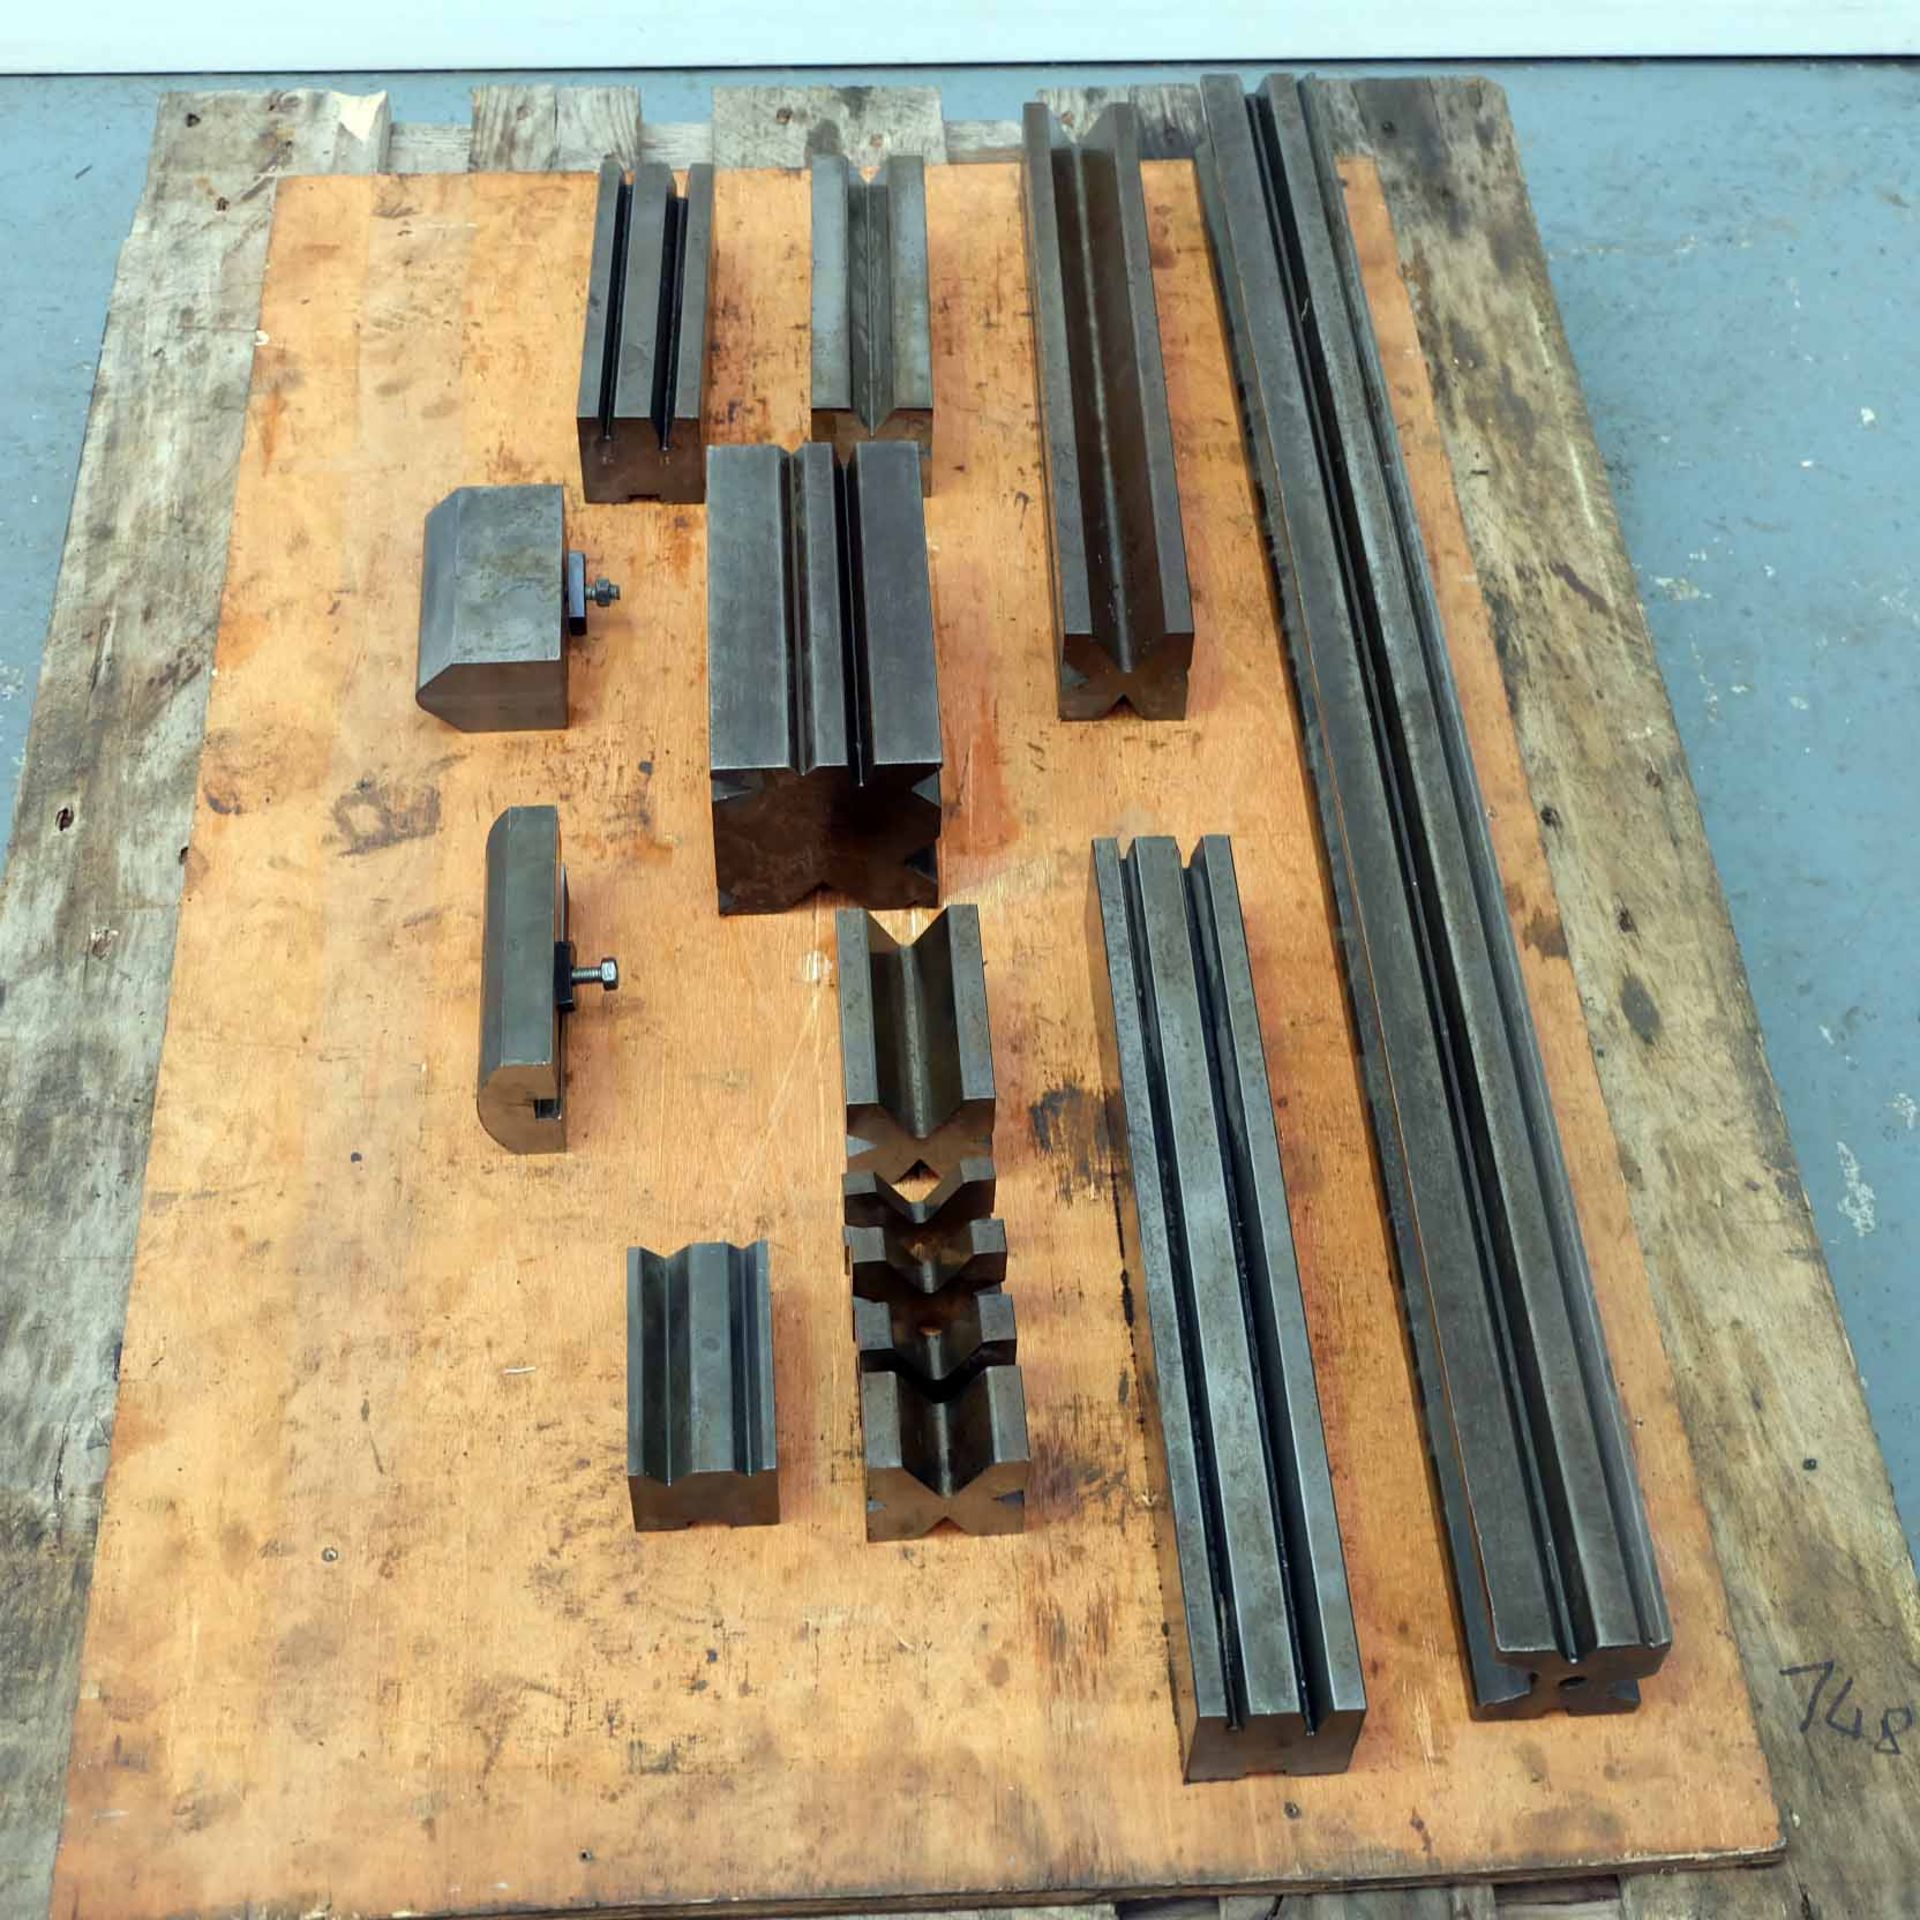 Quantity of Miscalaneous Press Brake Bottom Tooling. Various Sizes & Shapes. - Image 2 of 7